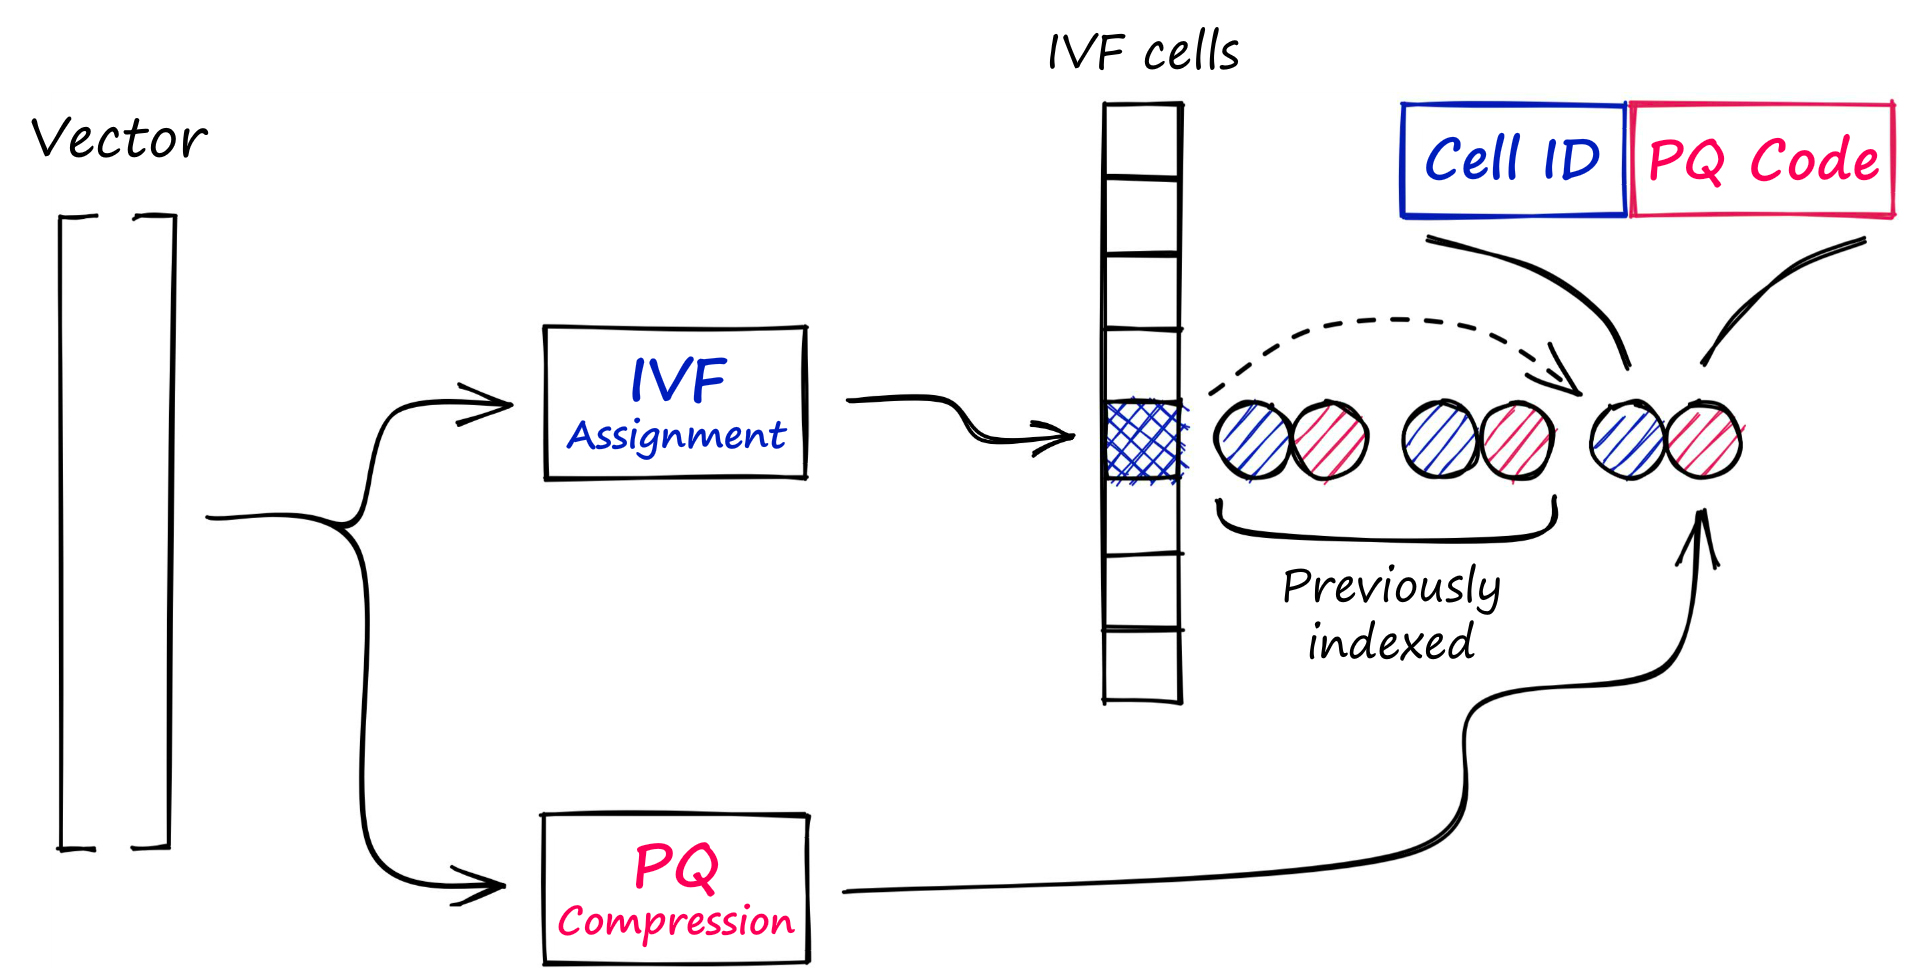 Indexing process for IVFADC, adapted from [4].